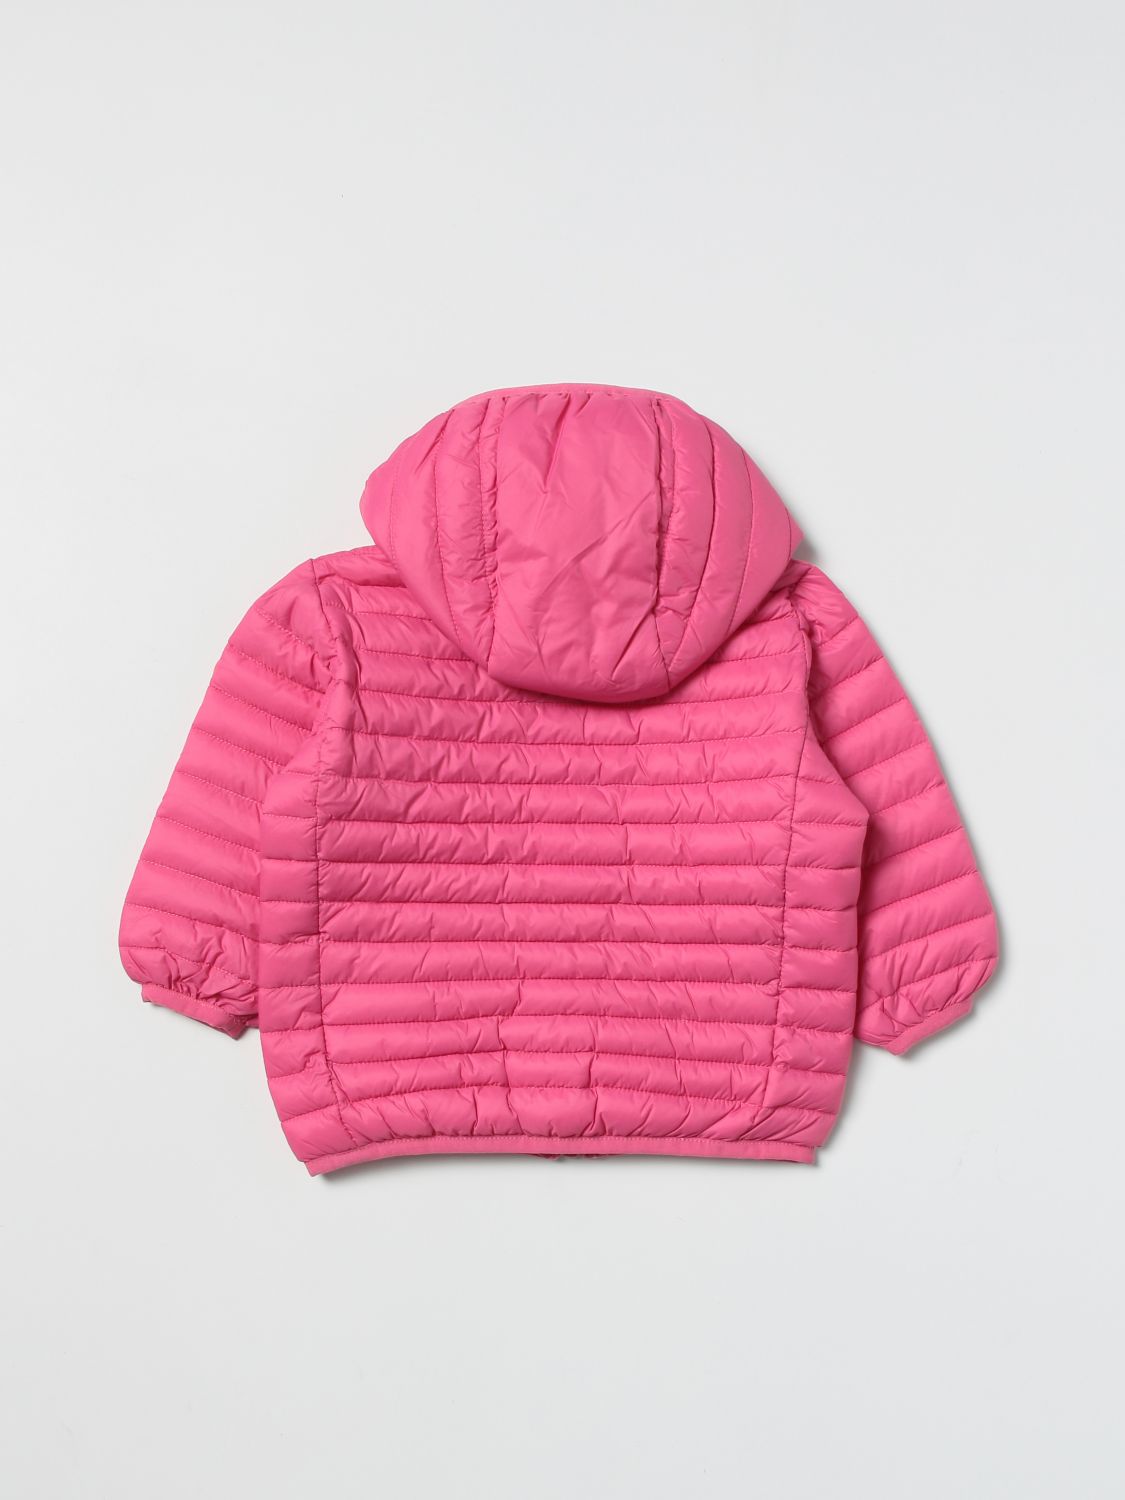 Jacke Save The Duck: Save The Duck Baby Jacke pink 2